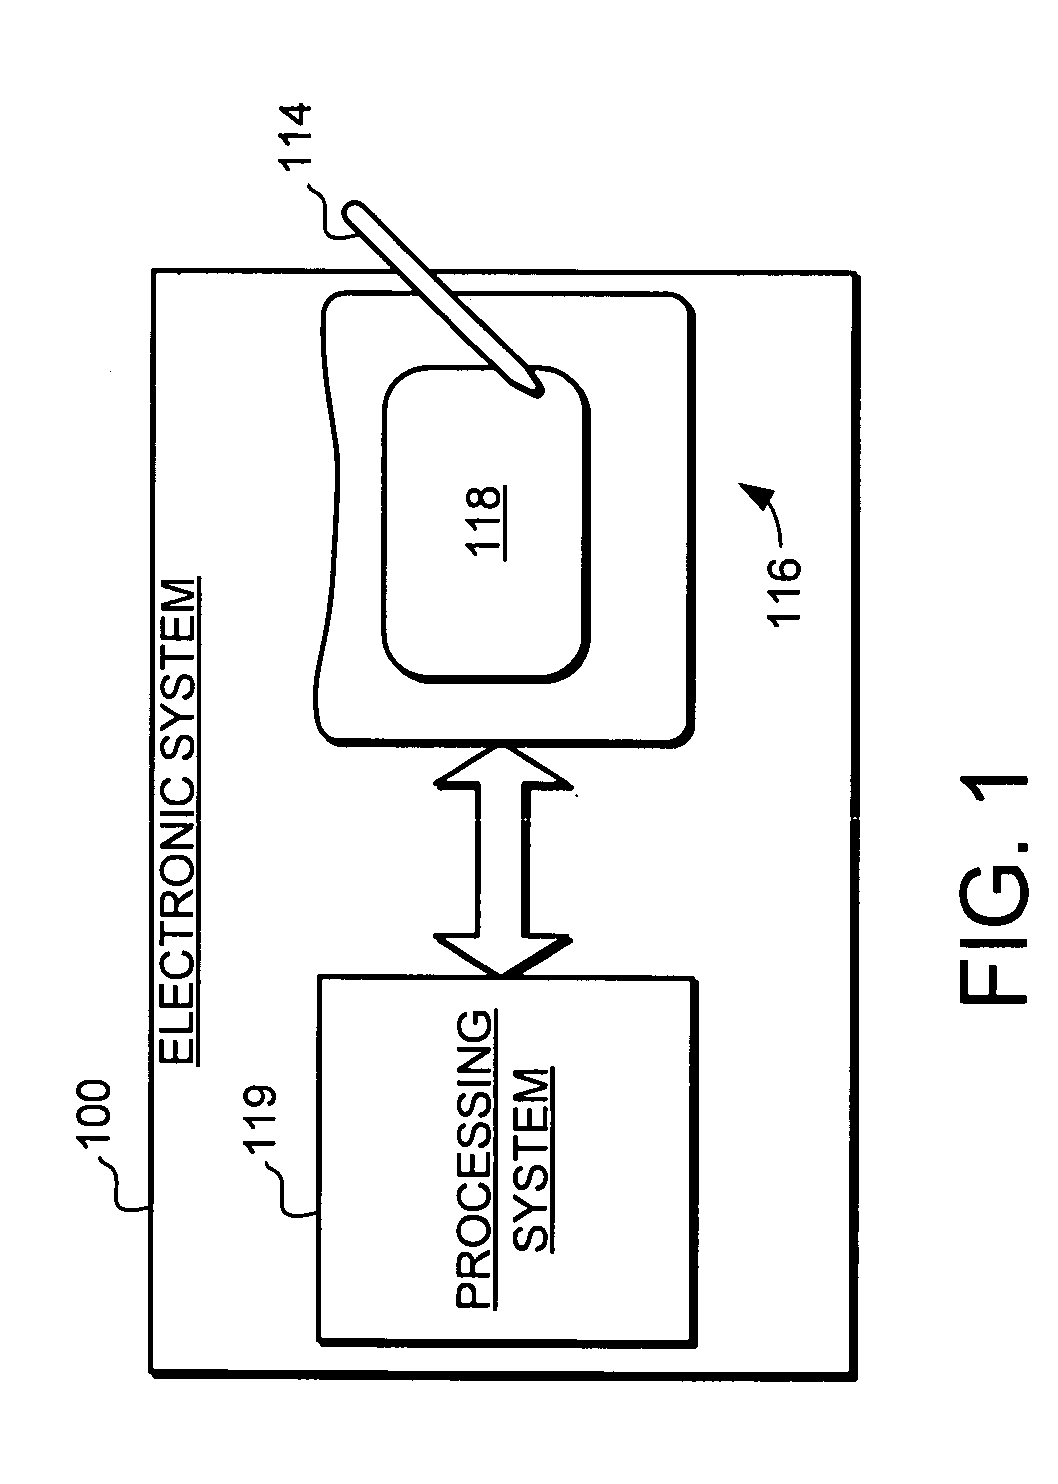 Method and apparatus for extended adjustment based on relative positioning of multiple objects contemporaneously in a sensing region